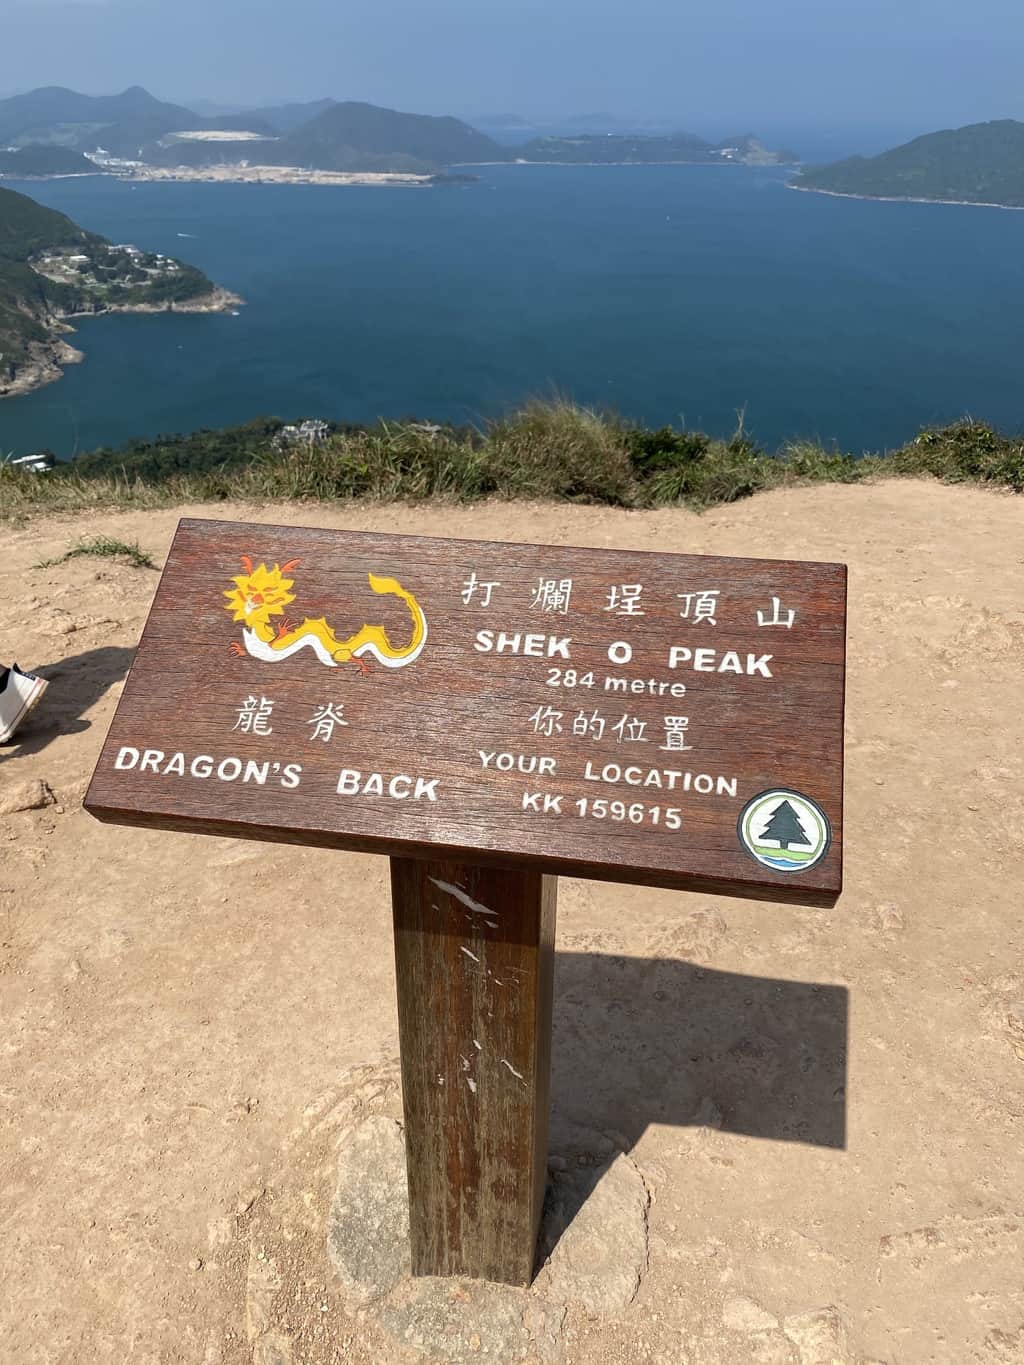 Featured image for “Slaying the Dragon’s Back Hike in Hong Kong”